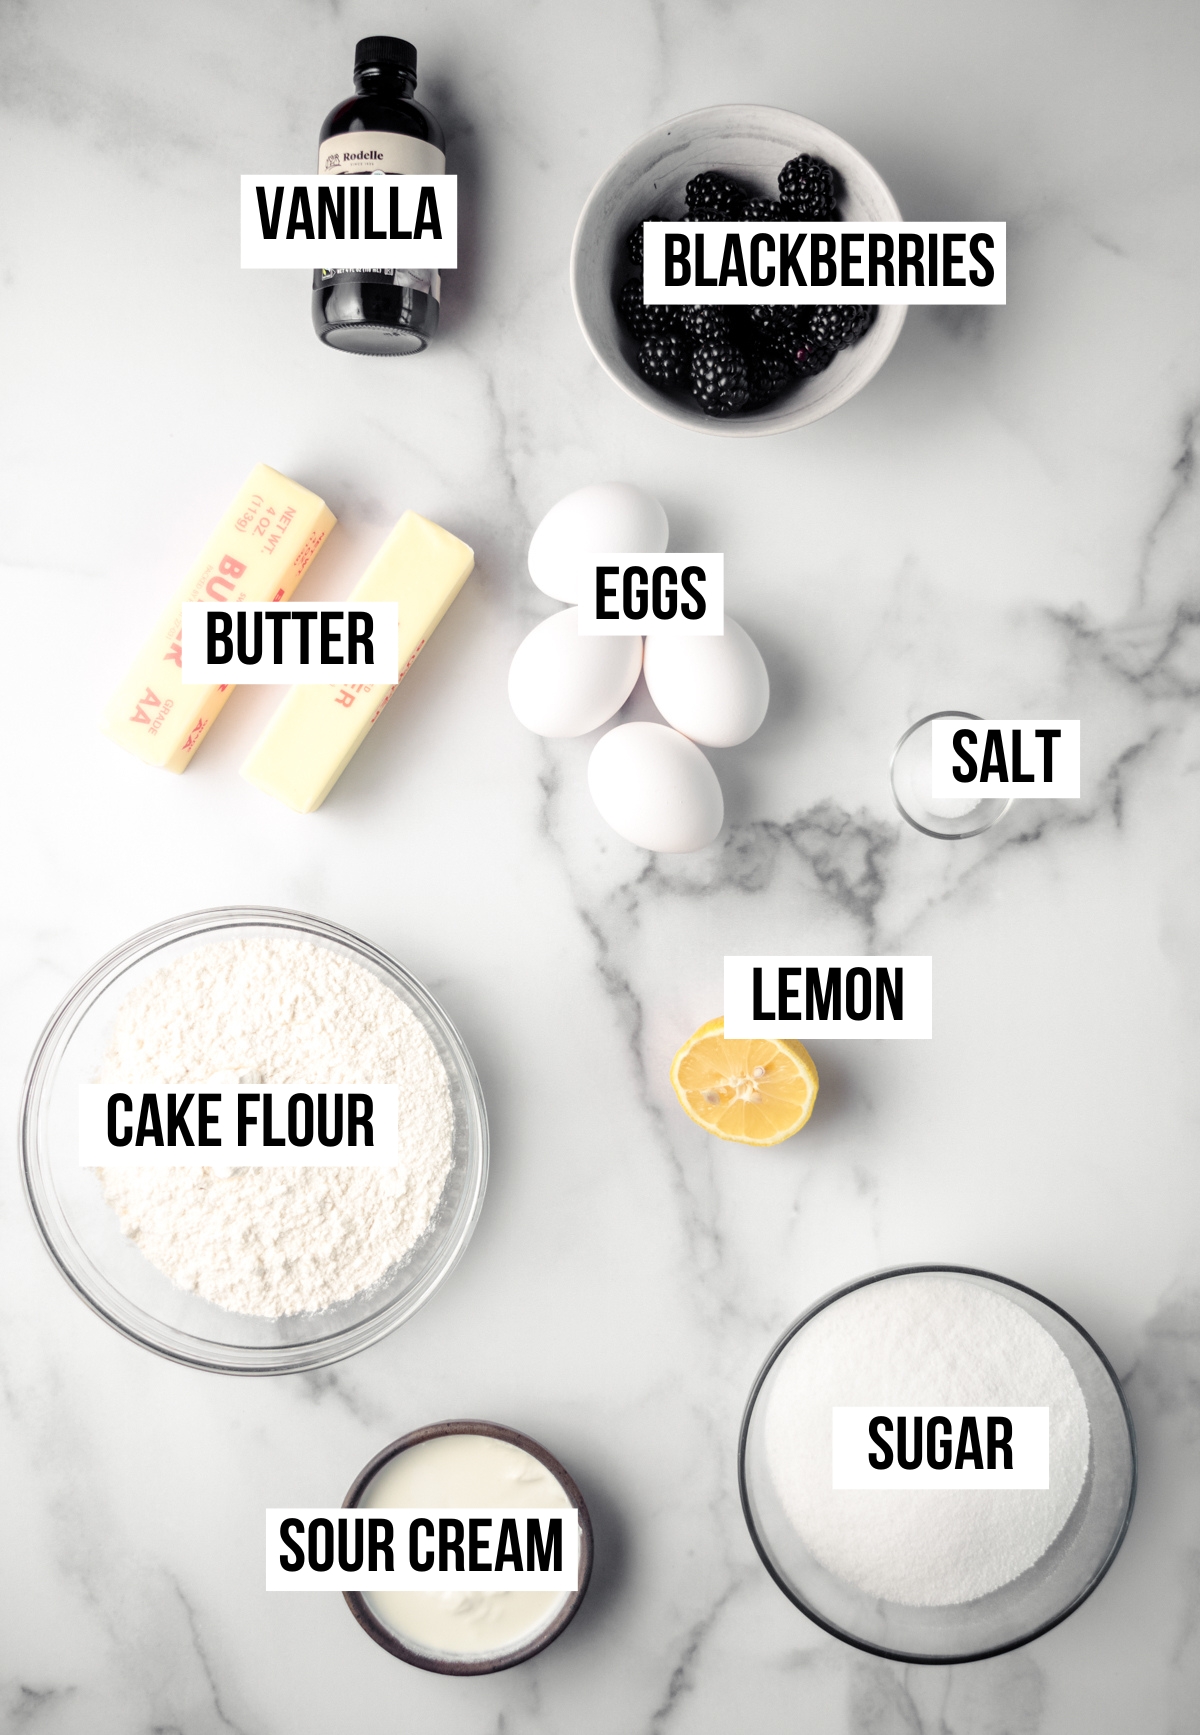 Aerial photo of ingredients for blackberry pound cake with text overlay.